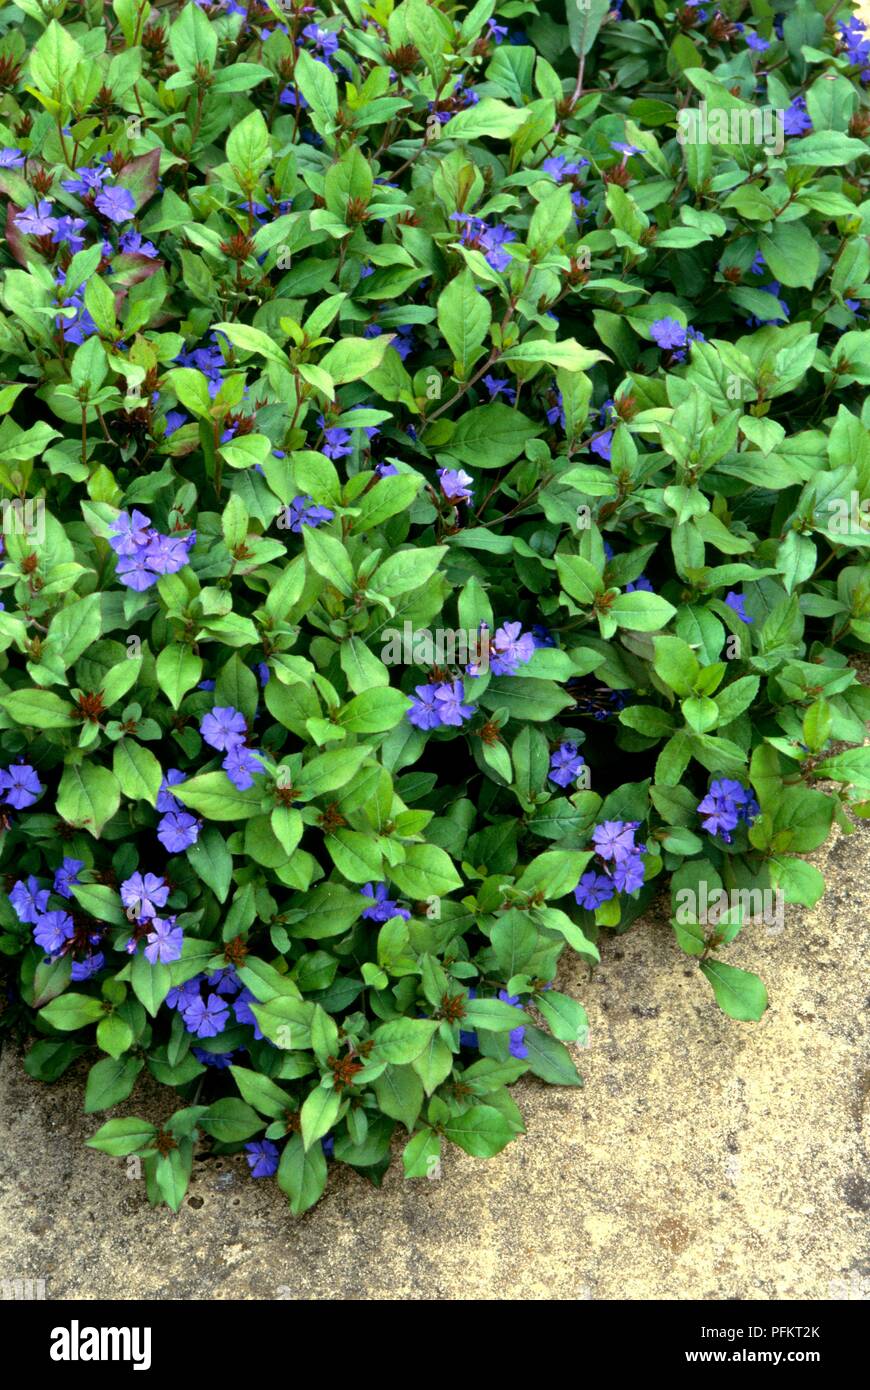 Blue flowers and green leaves from Ceratostigma plumbaginoides (Plumbago), forming border Stock Photo